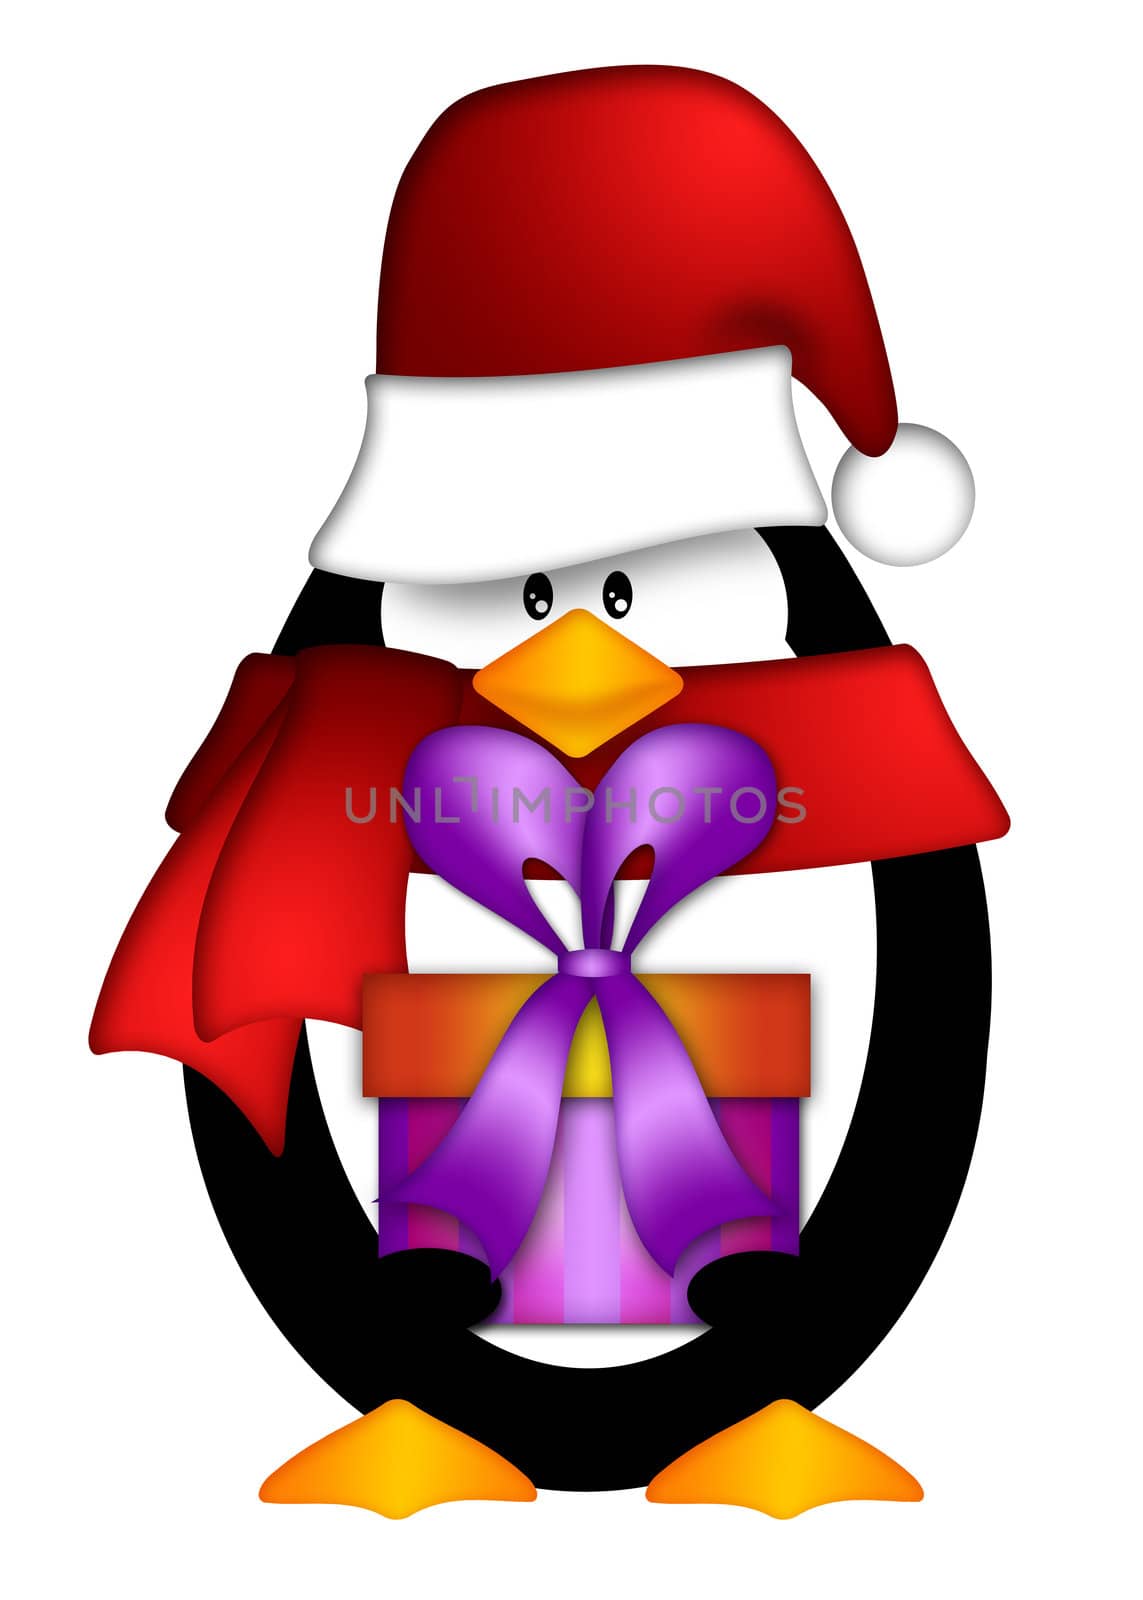 Cute Cartoon Penguin with Santa Hat and Red Scarf Holding Wrapped Present Illustration Isolated on White Background